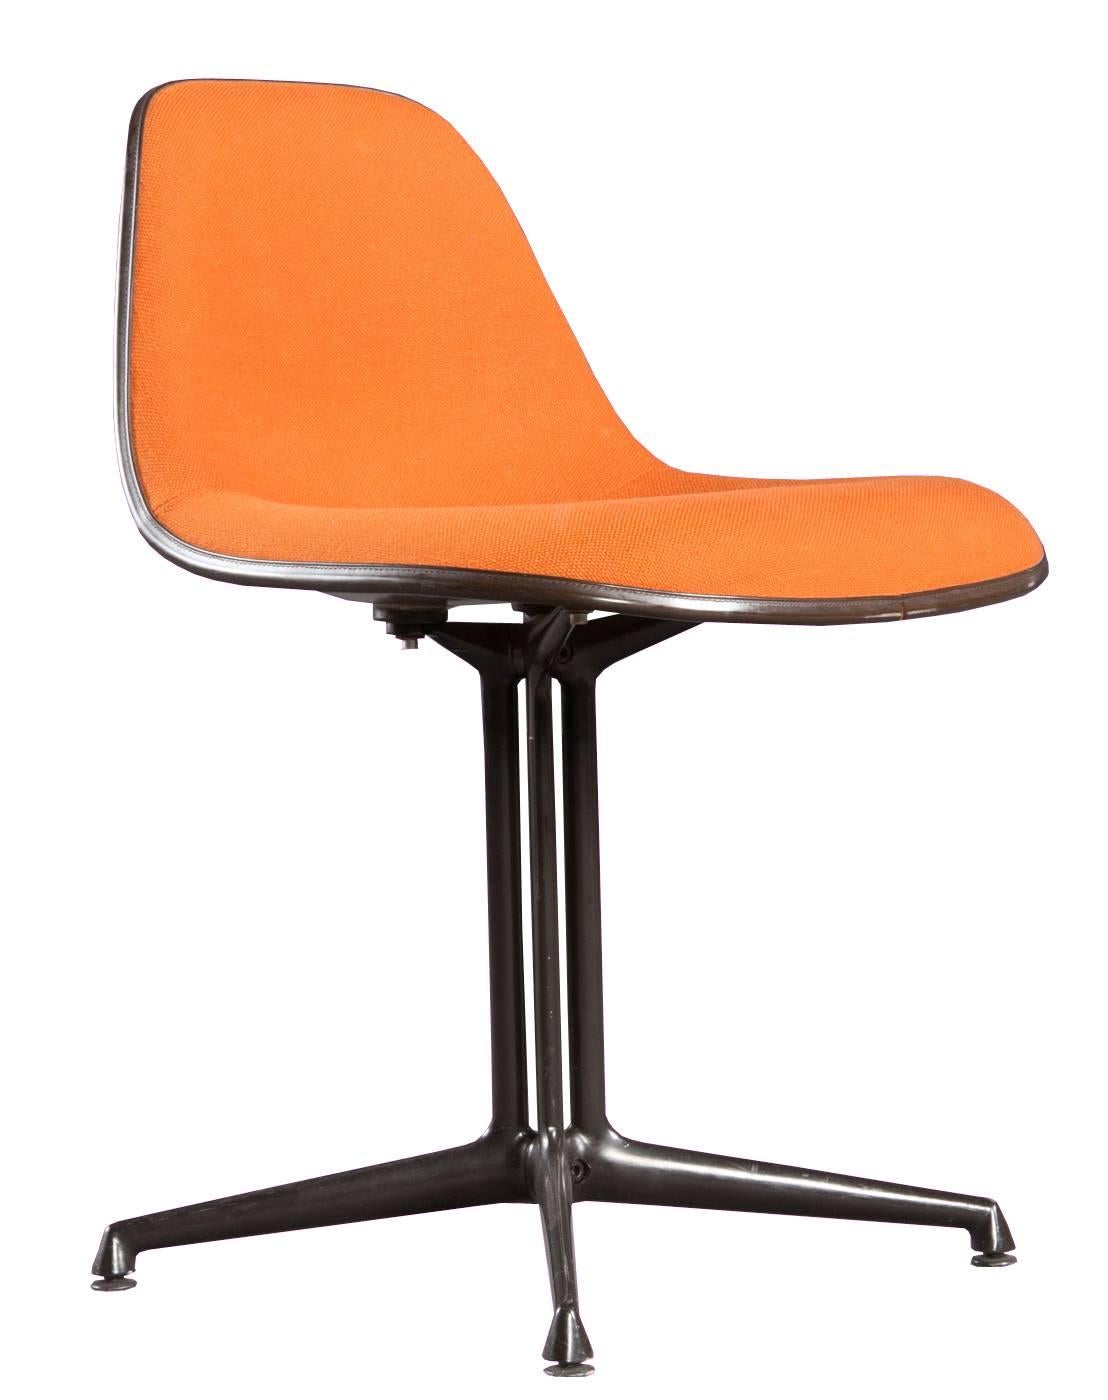 Model La Fonda chairs designed in 1961 by Charles & Ray Eames produced by Vitra for Herman Miller. 

The chairs have a fiberglass shell with original orange colored hop stack upholstery and the iconic La Fonda base. Underside marked with sticker